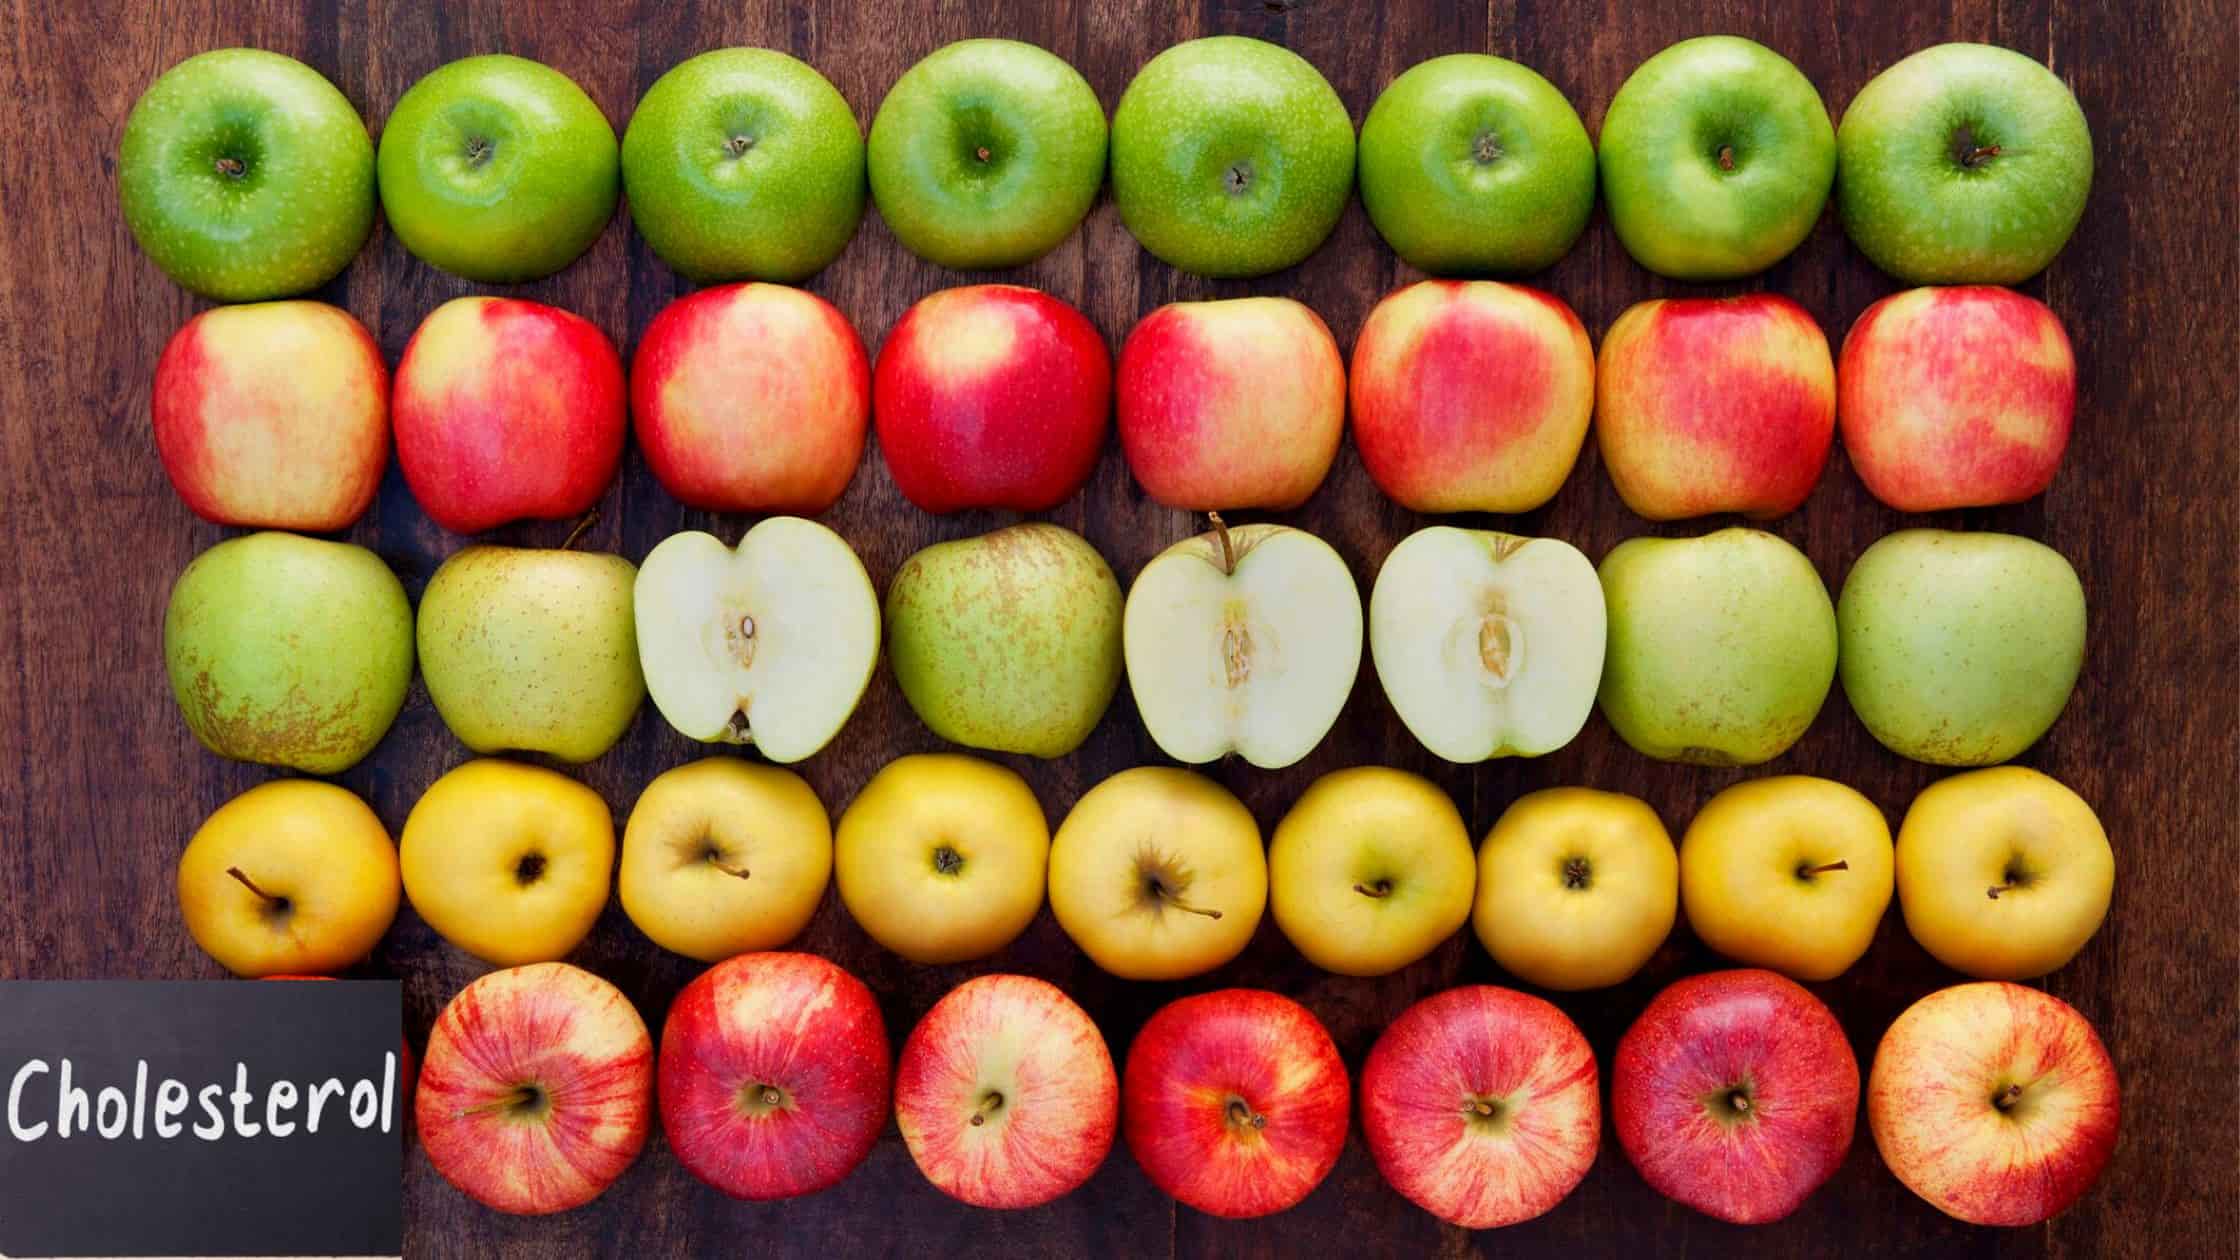 Apples Aid In Cholesterol Reduction